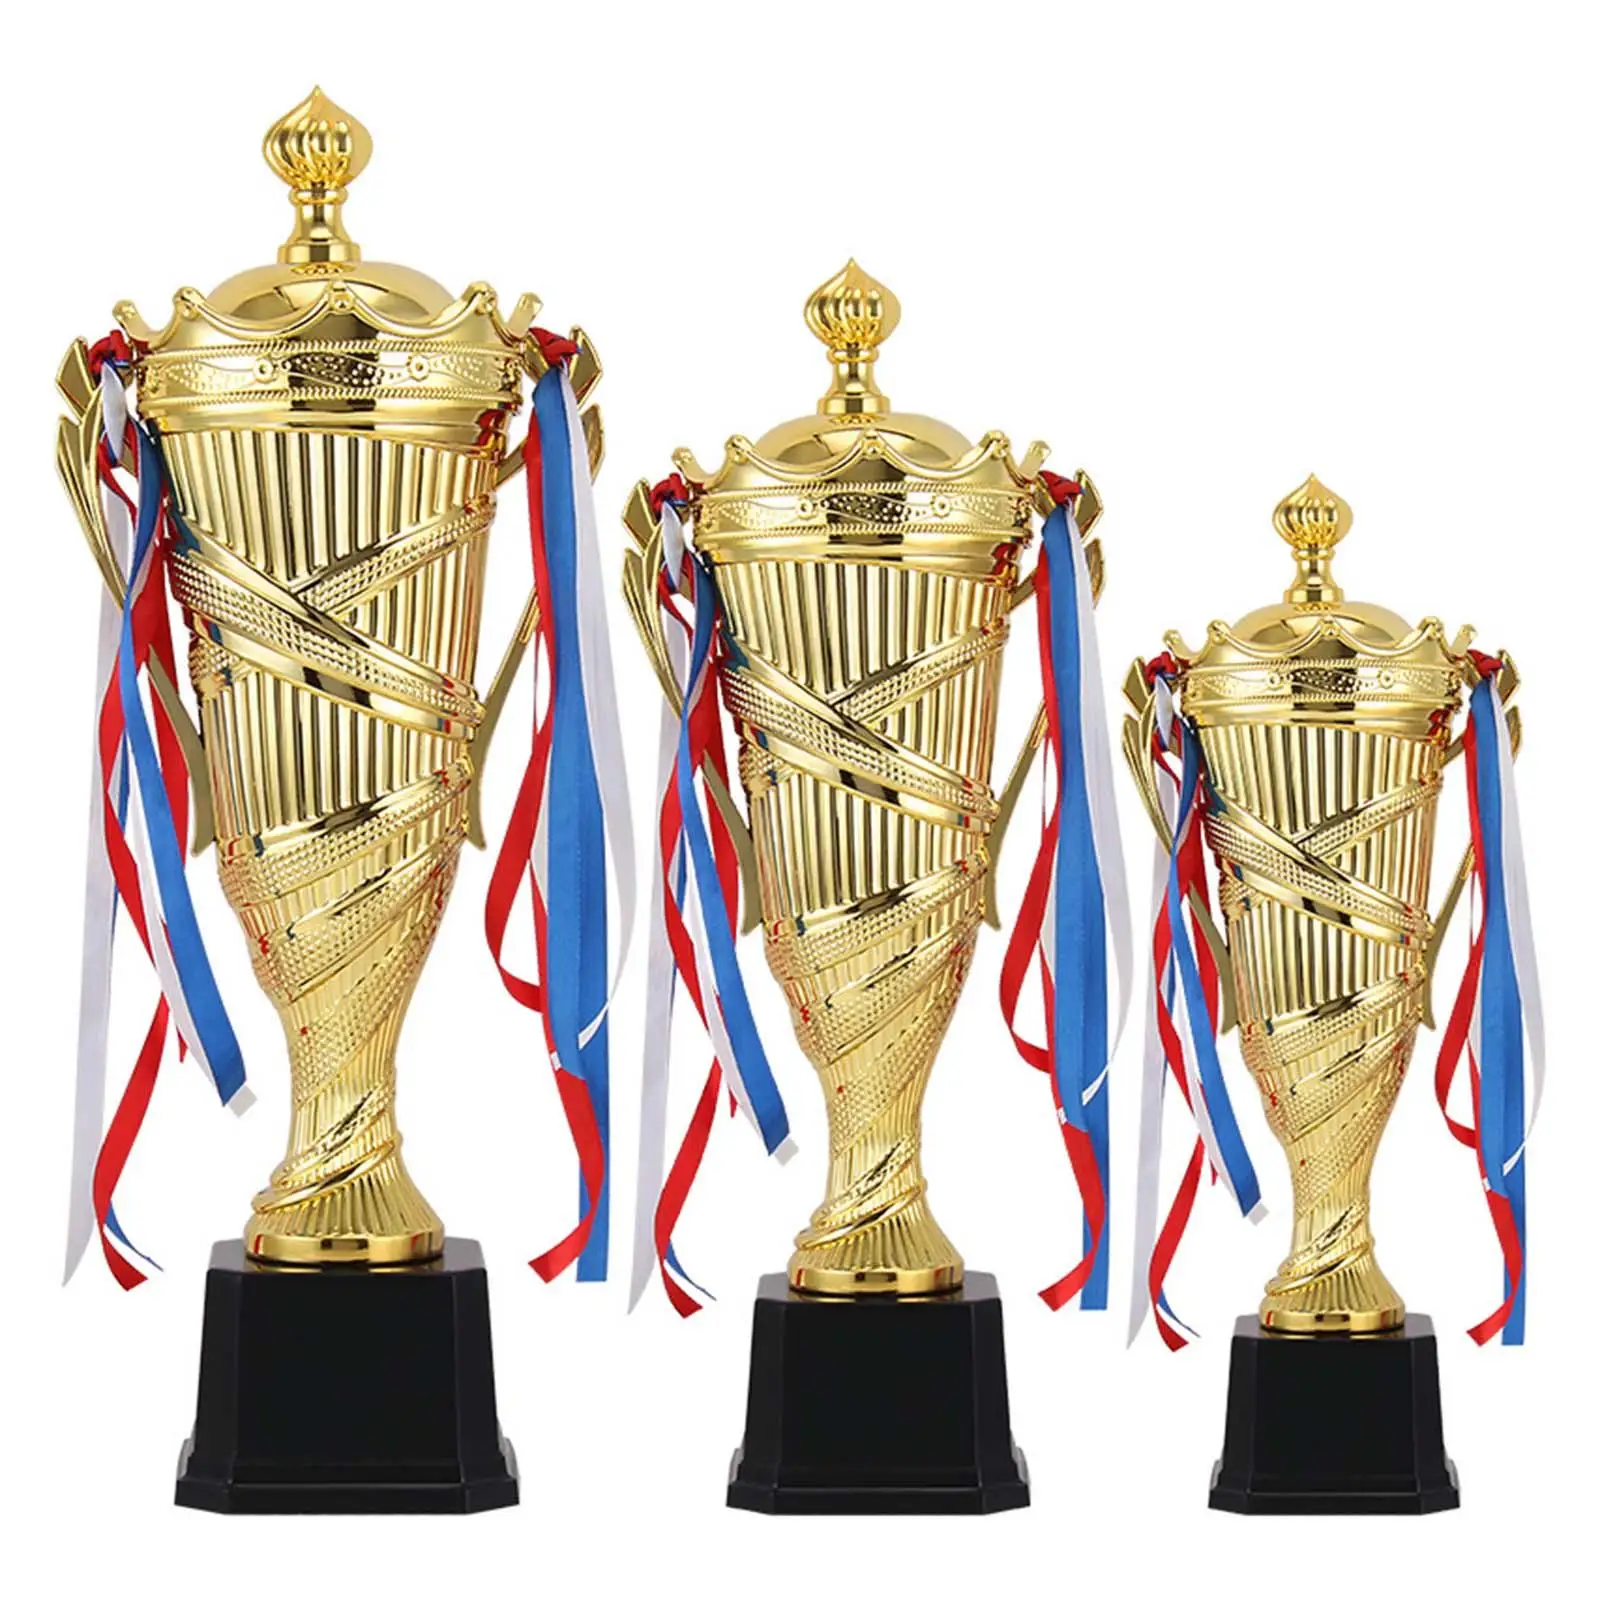 Adults Trophy Party Supplies Decoration Fine Workmanship Trophy for Kids for Basketball Celebrations Competitions Party